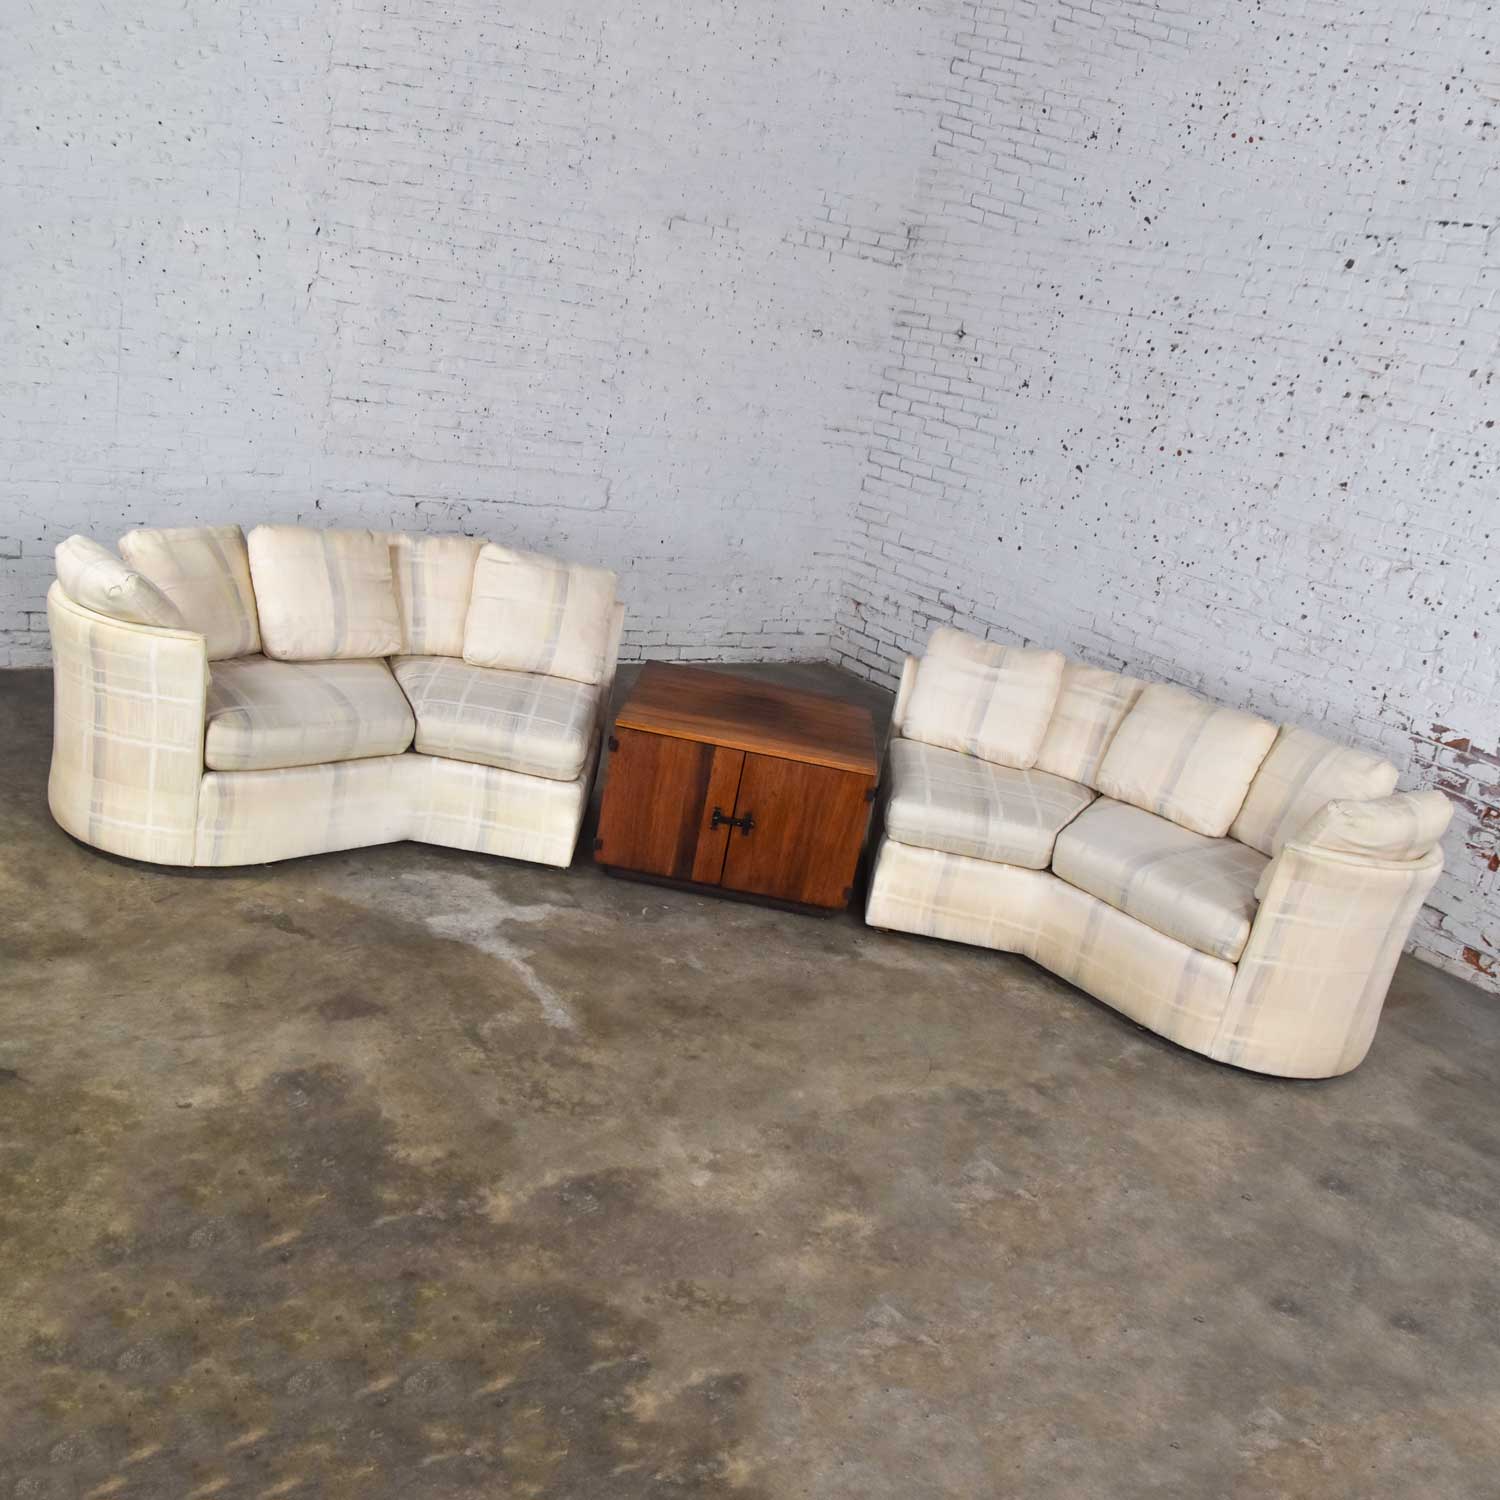 Vintage Modern or Art Deco Revival Two Piece Angled Sectional Sofa by Dansen for Hekman